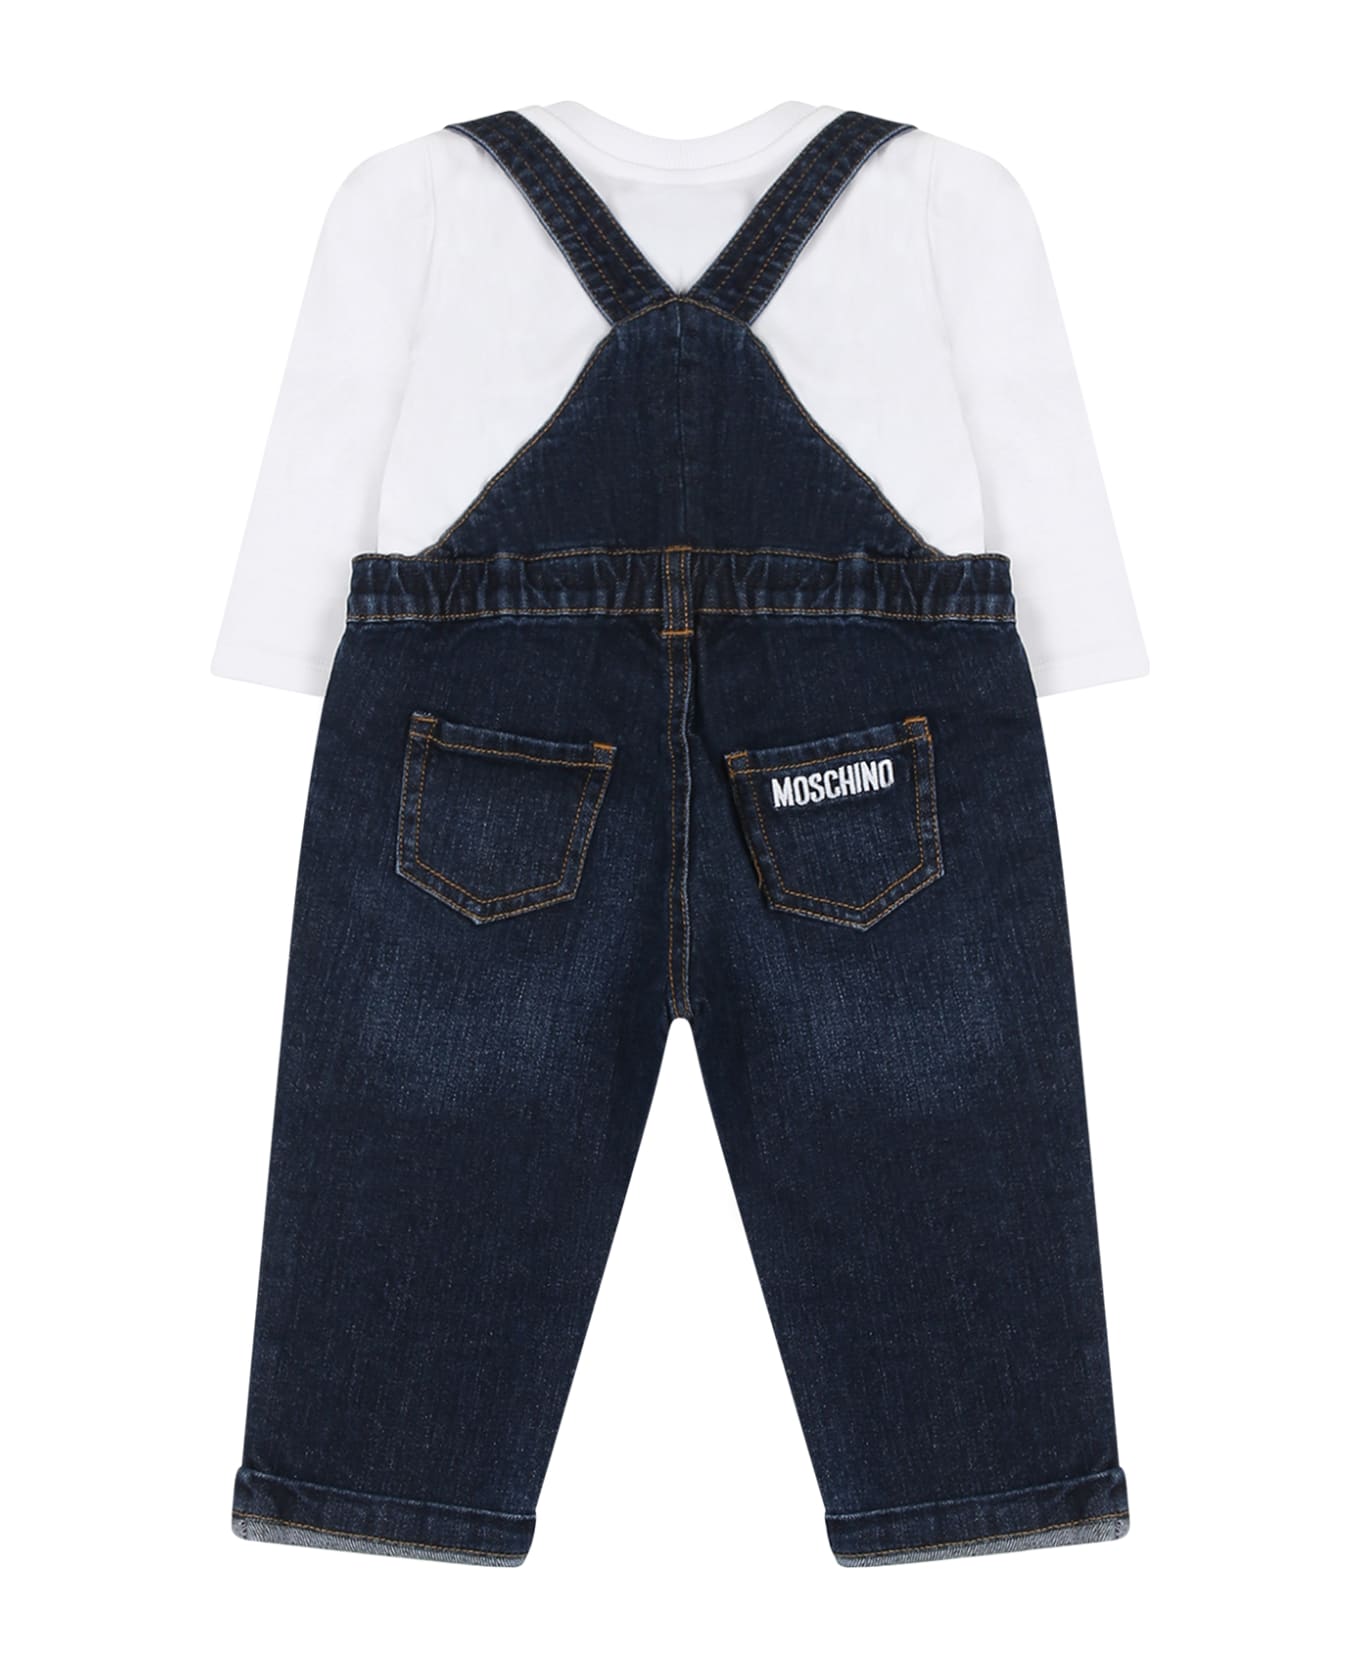 Moschino Blue Suit For Bay Girl With Teddy Bear - DENIM BLUE コート＆ジャケット